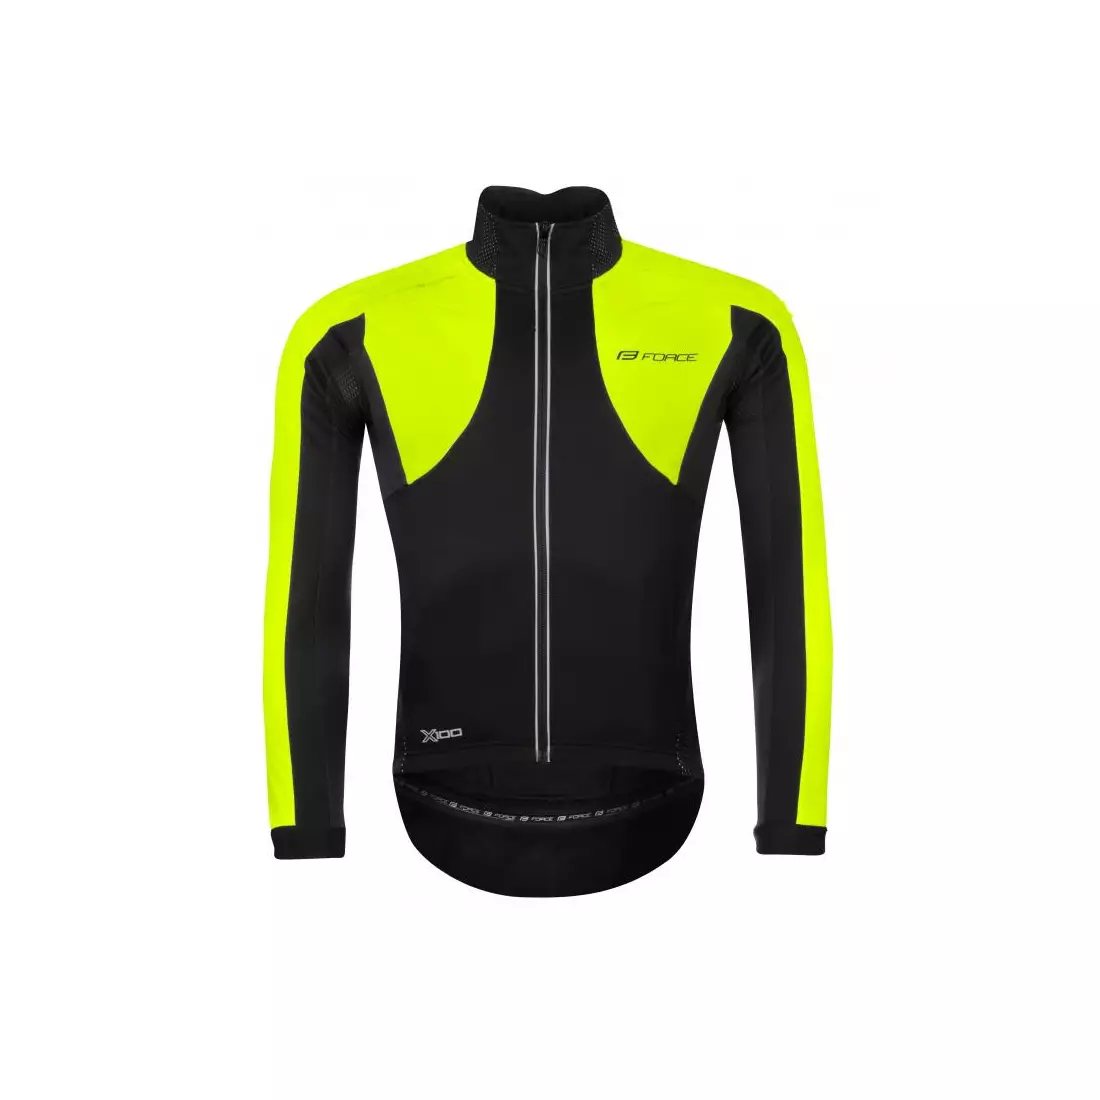 FORCE X100 winter bicycle jacket Black Fluor Yellow 899860